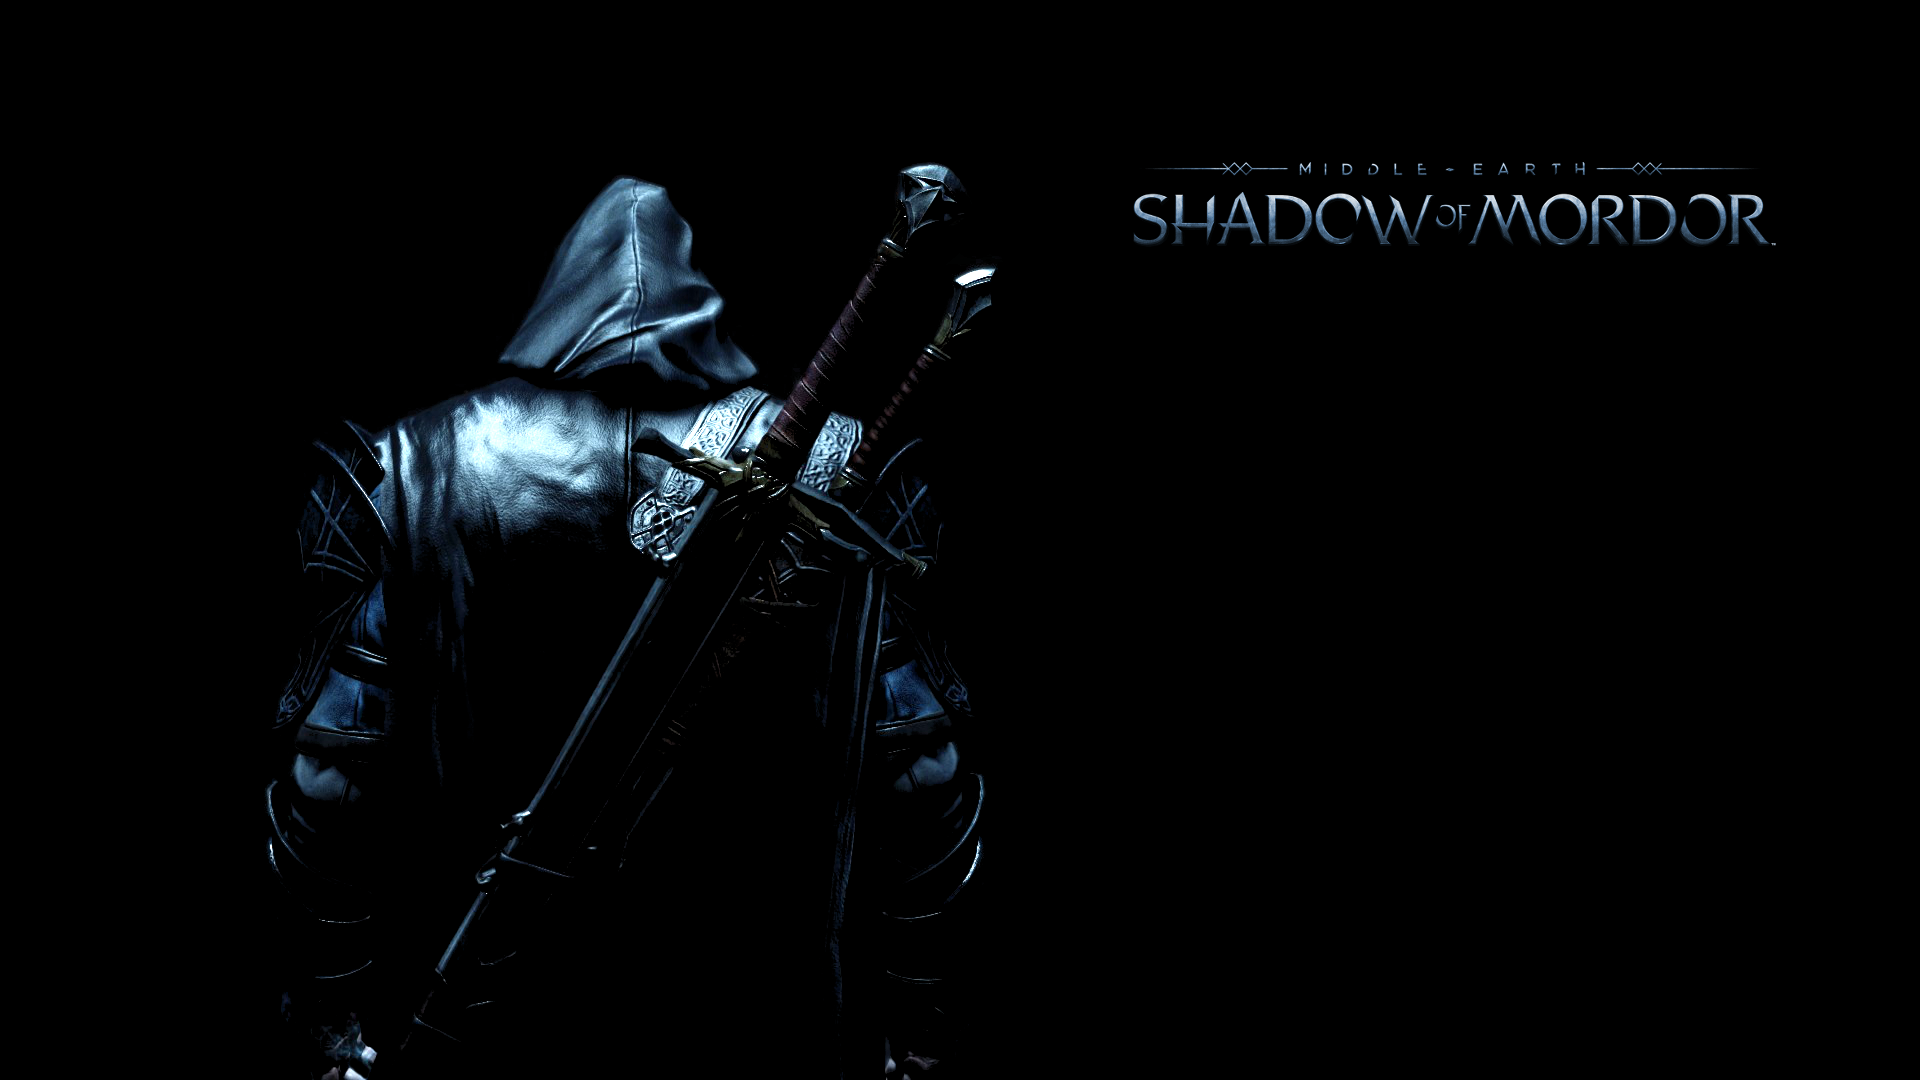 Video Game Middle-earth: Shadow of Mordor HD Wallpaper | Background Image